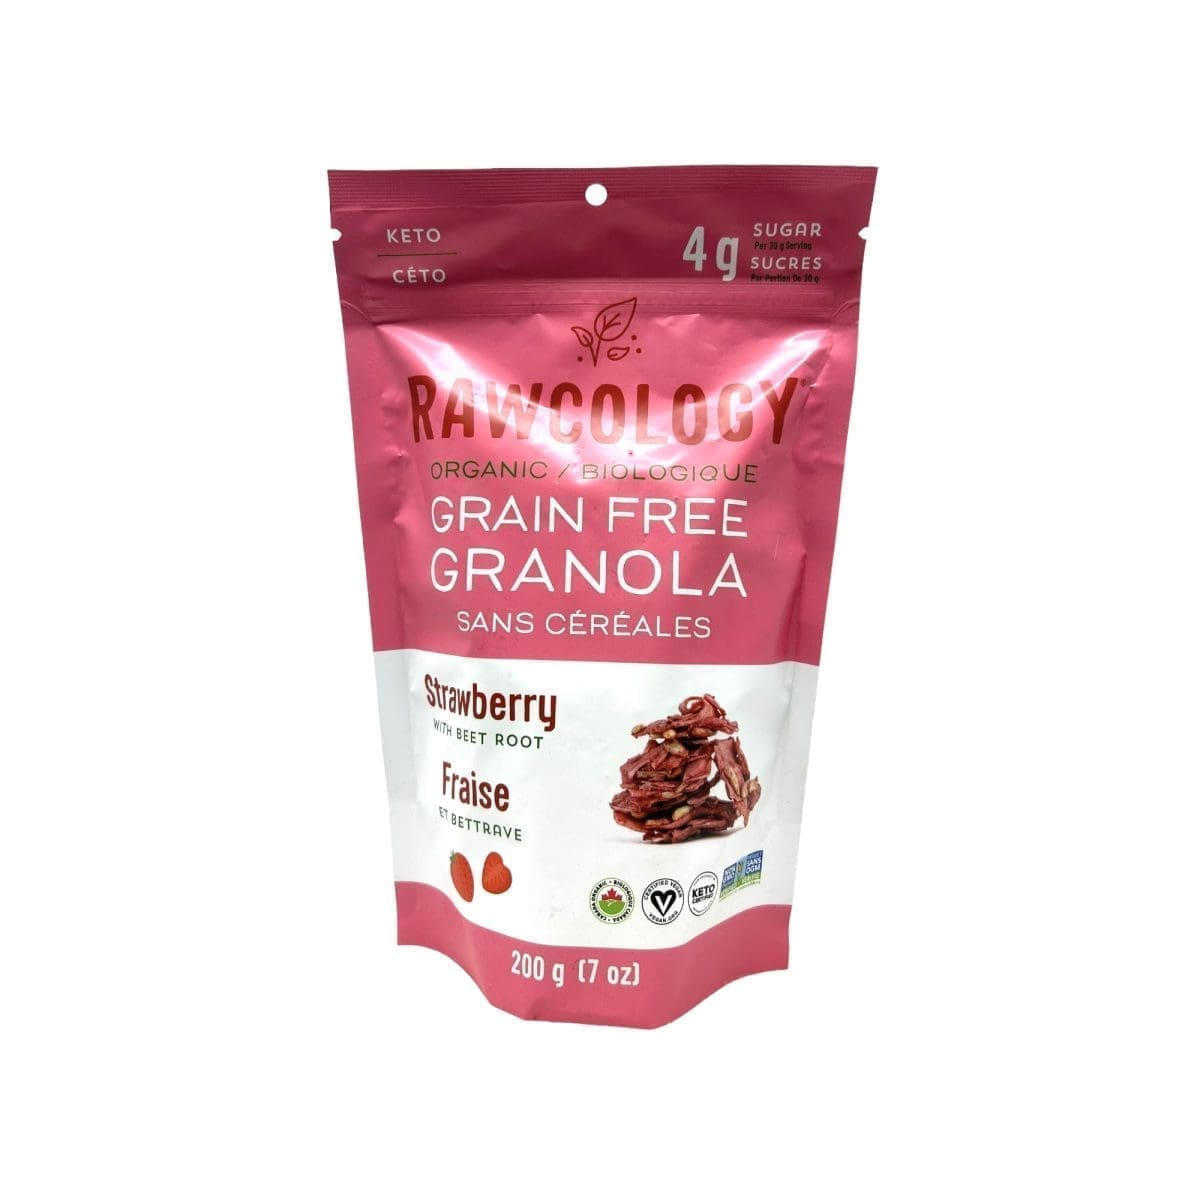 Rawcology Organic Grain Free Granola Strawberry with Beet Root (200g)